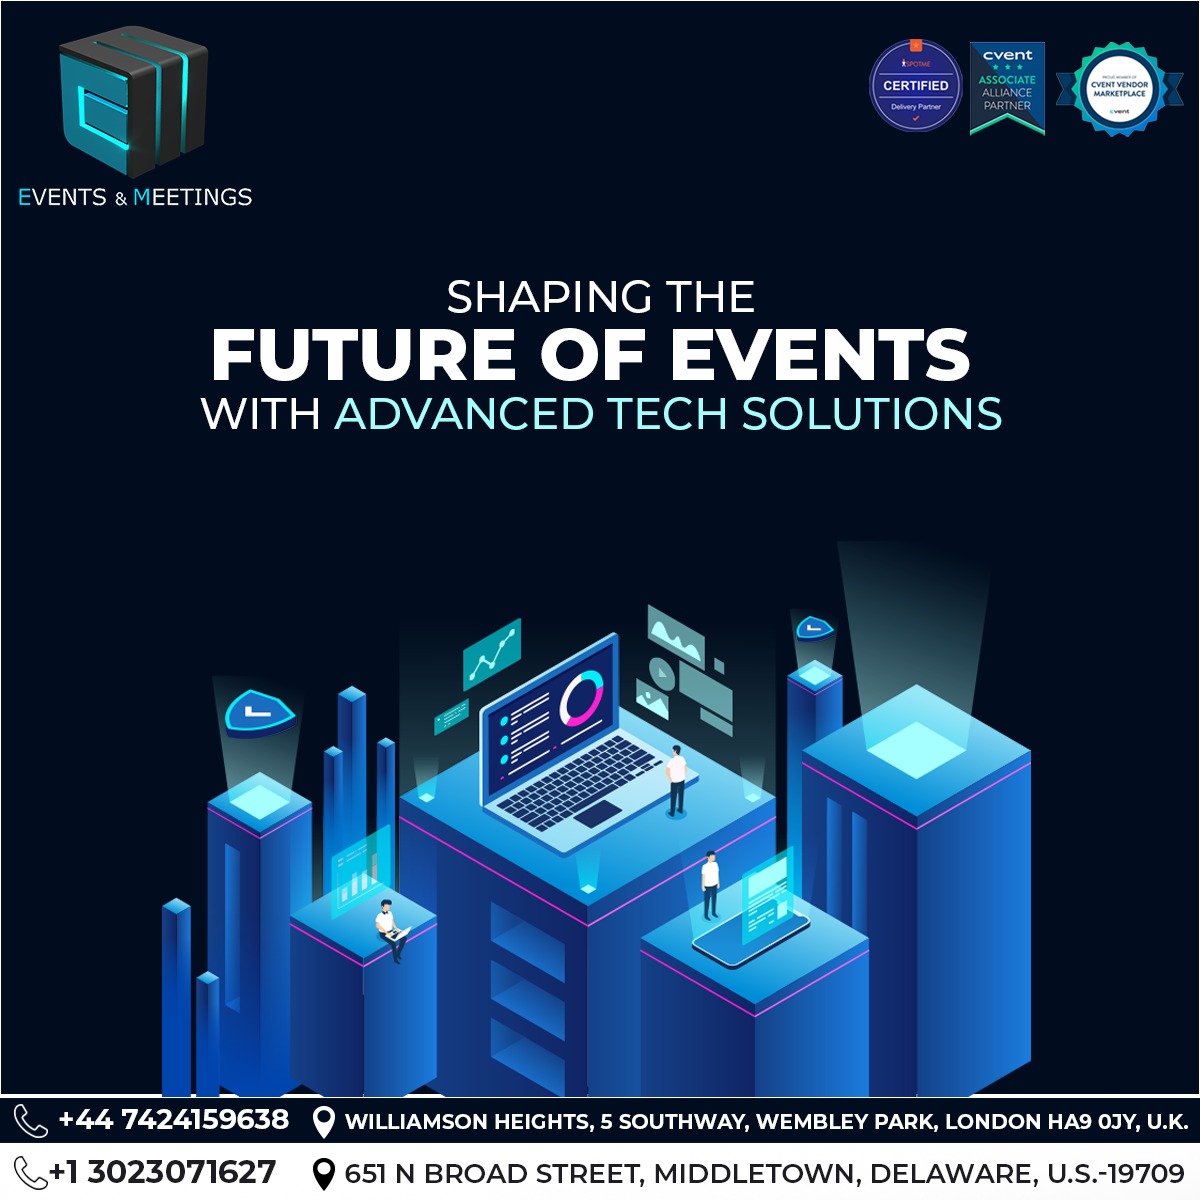 Transforming  your virtual gatherings!
Join us on this journey of redefining events, where technology meets the extraordinary. 

🌐 eventsandmeetings.co

#TechForEvents #EventInnovation #EventsAndTech #EventTechSolutions #cvent #spotme #eventtechsolutions #eventsandmeetings